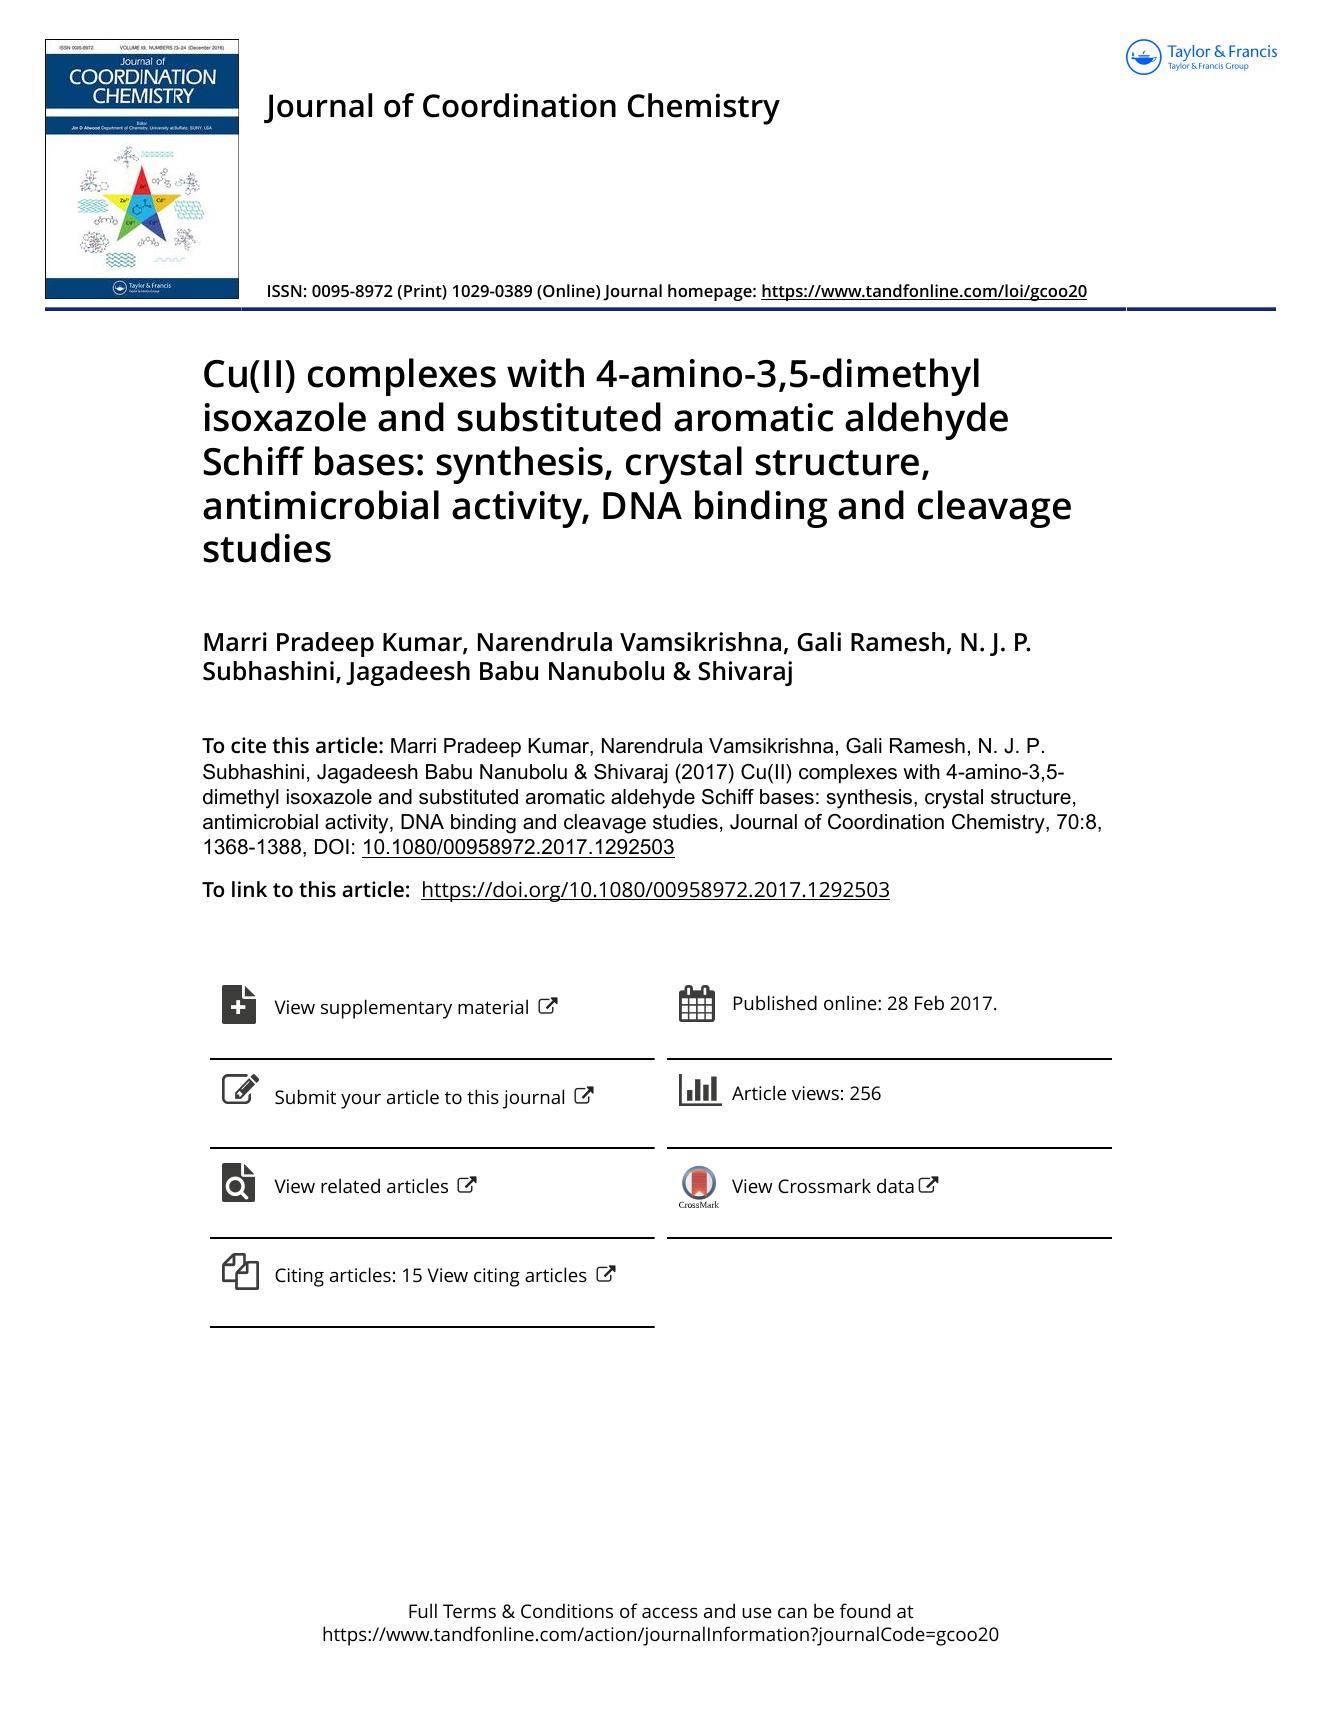 Cu(II) complexes with 4-amino-3,5-dimethyl isoxazole and substituted aromatic aldehyde Schiff bases: synthesis, crystal structure, antimicrobial activity, DNA binding and cleavage studies by unknow